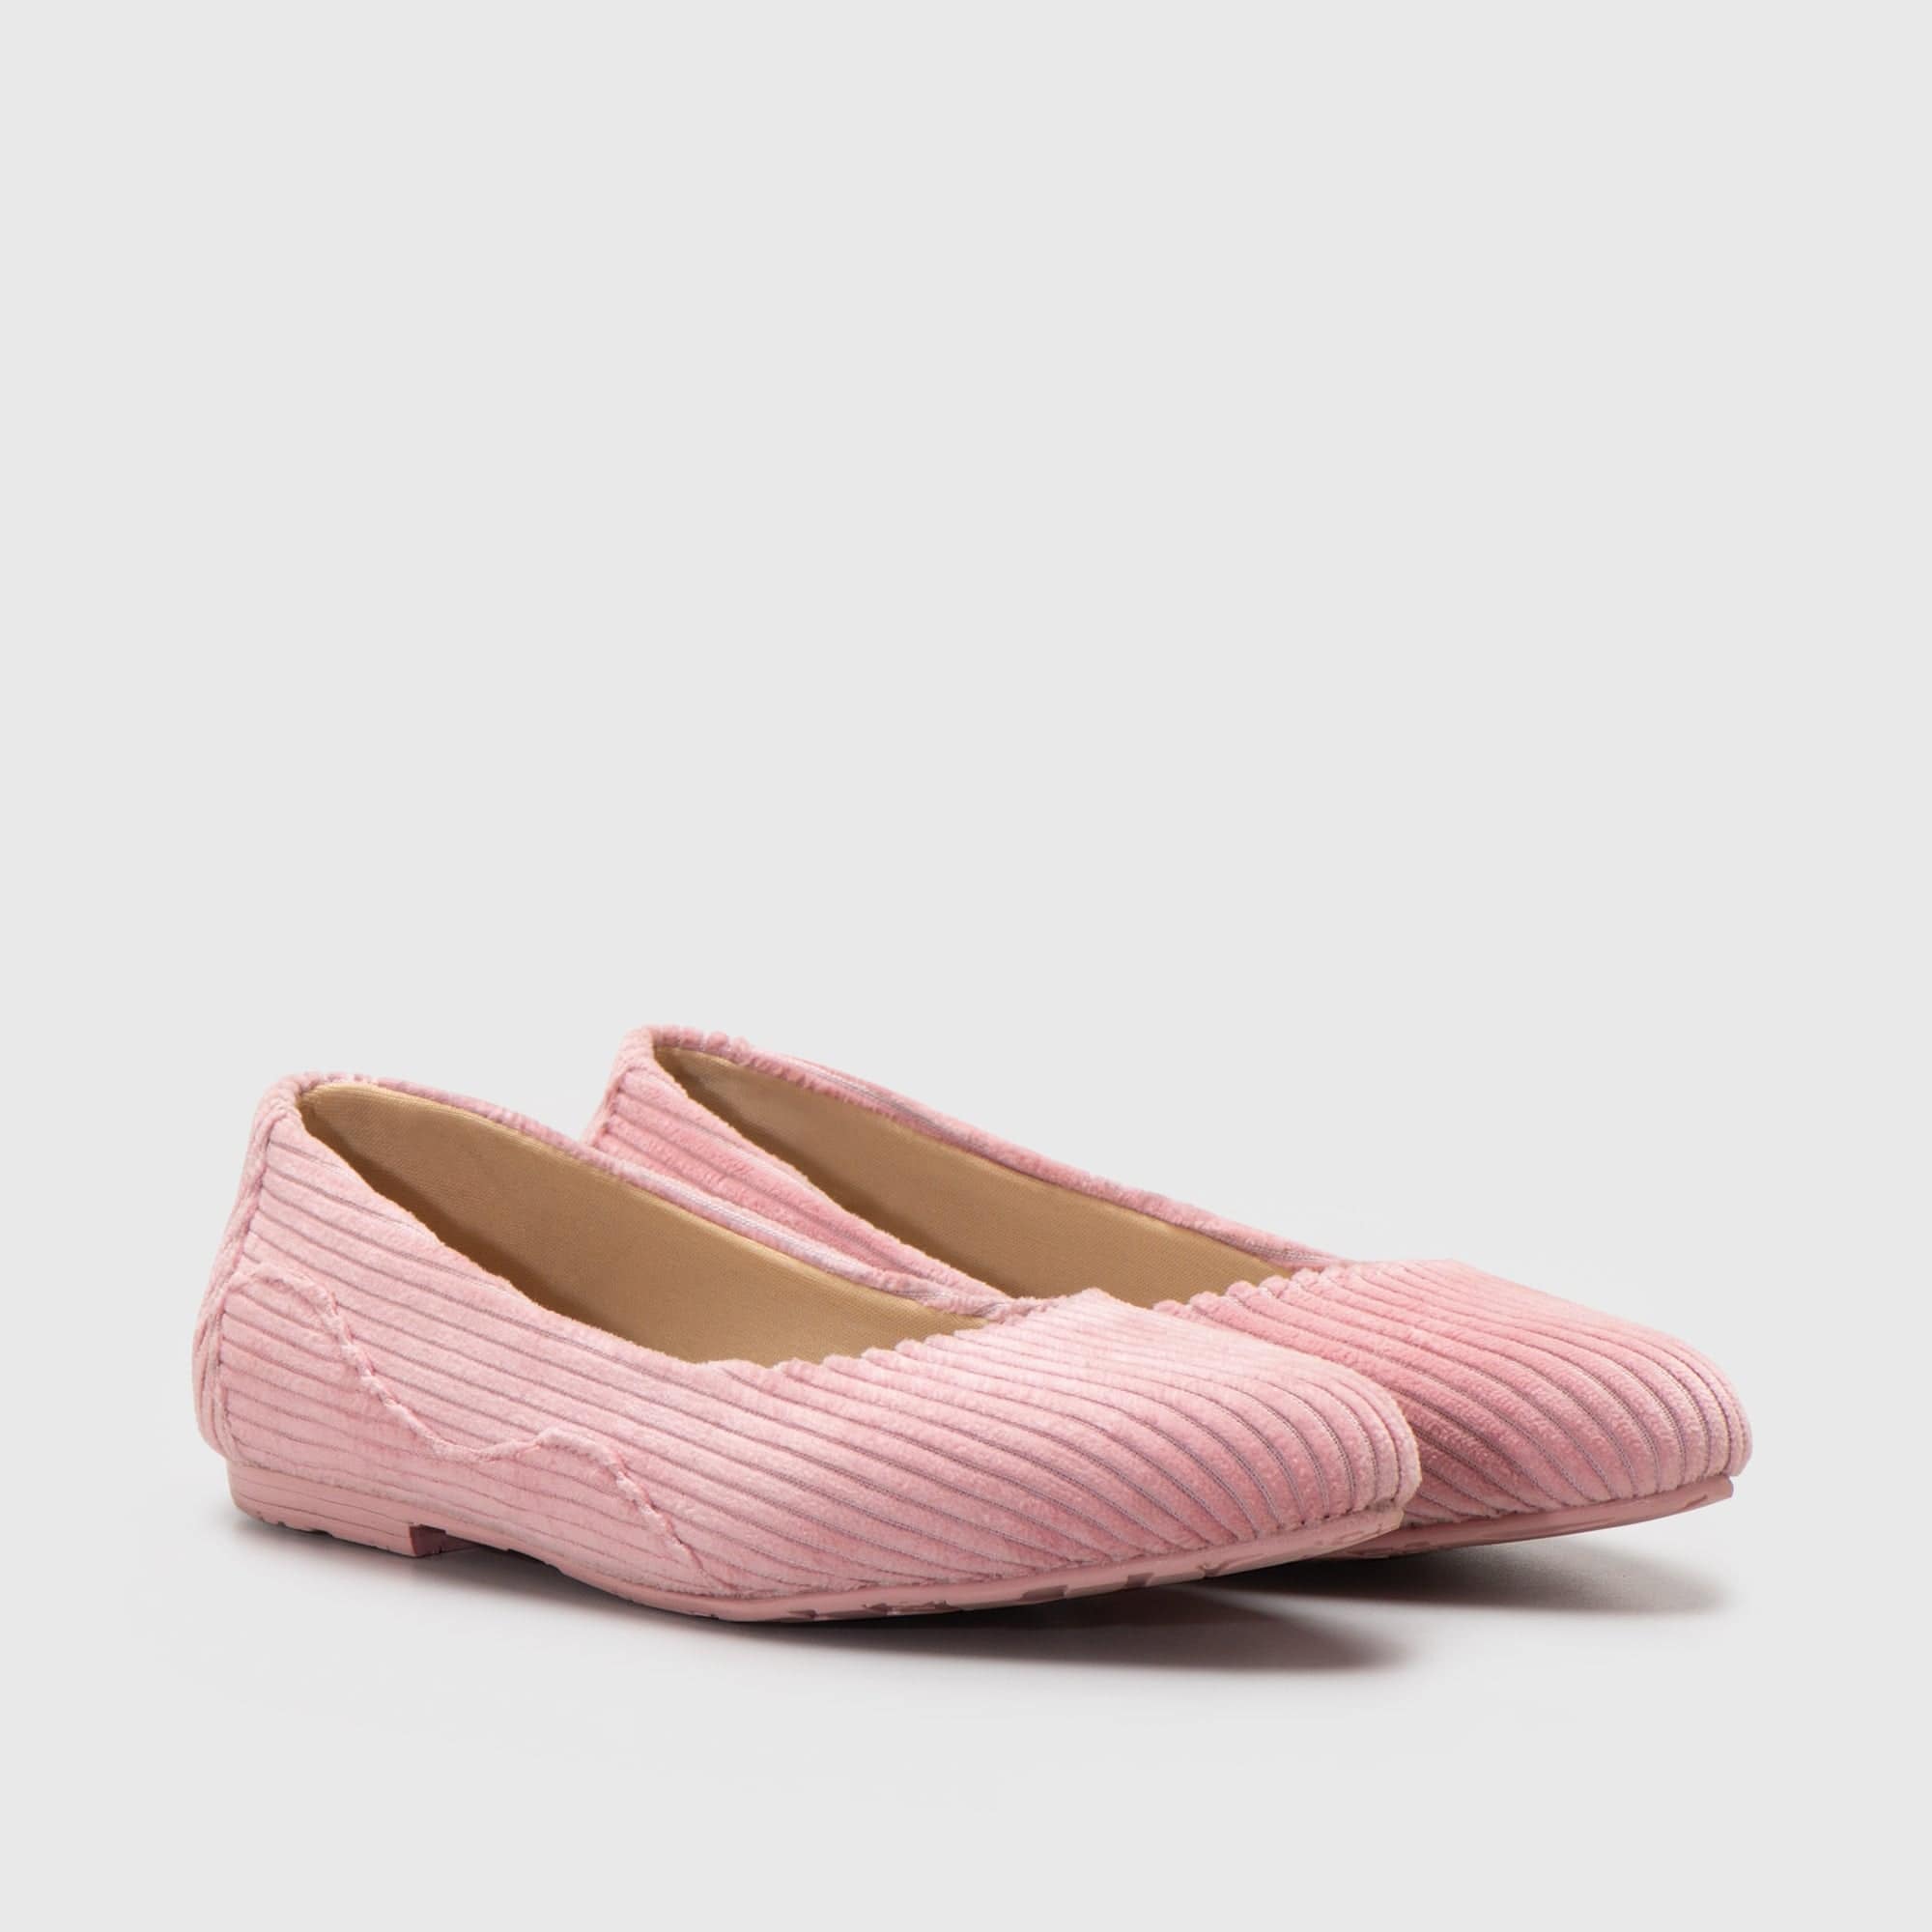 Adorable Projects Official Flat shoes 35 / Pink Carson Flat Shoes Pink